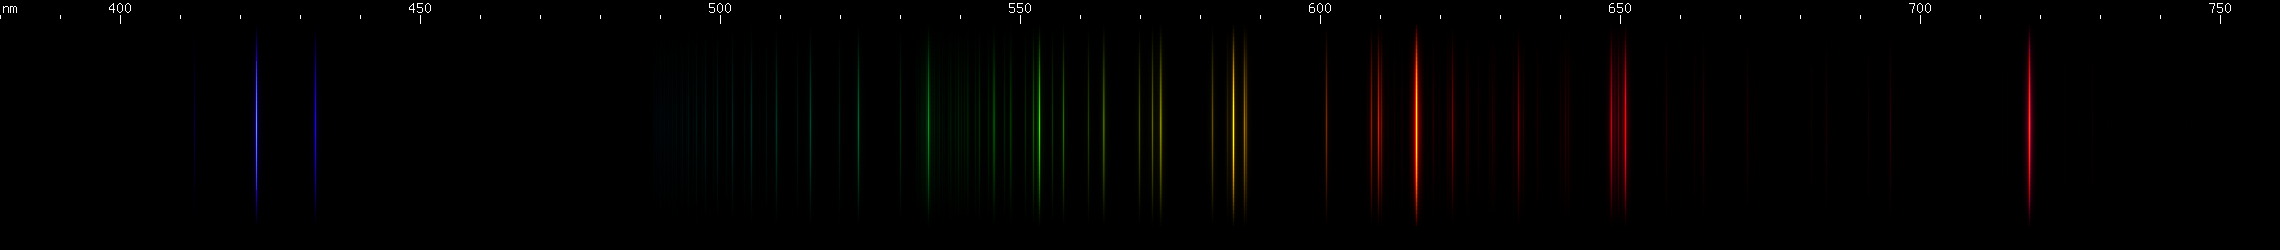 Spectral Lines of Francium